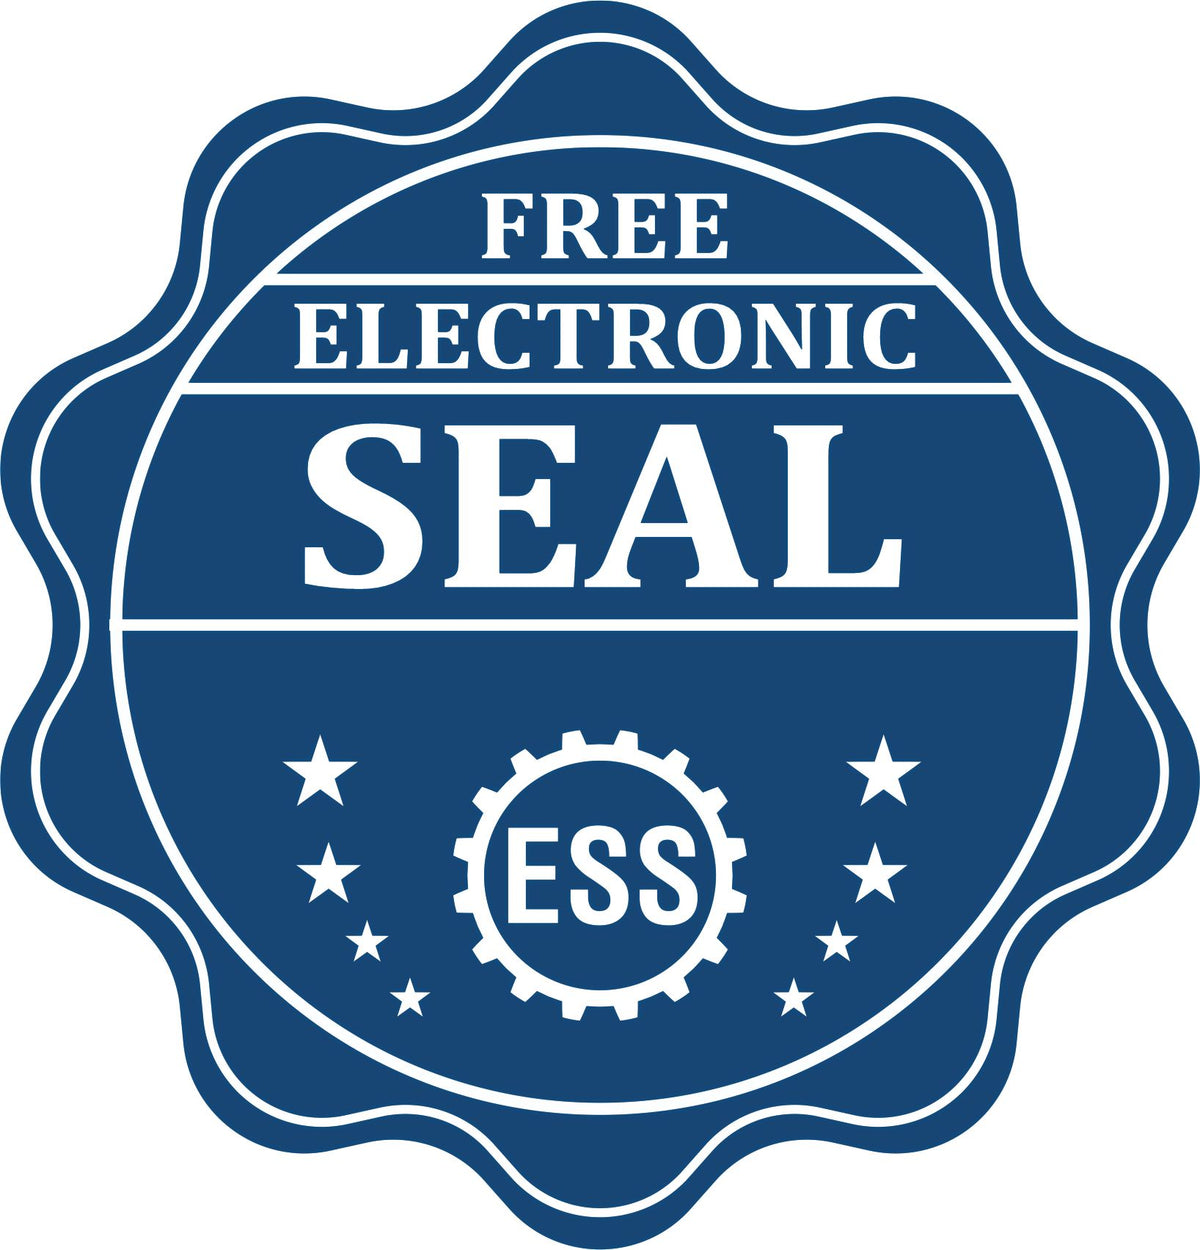 A badge showing a free electronic seal for the Handheld Kentucky Architect Seal Embosser with stars and the ESS gear on the emblem.